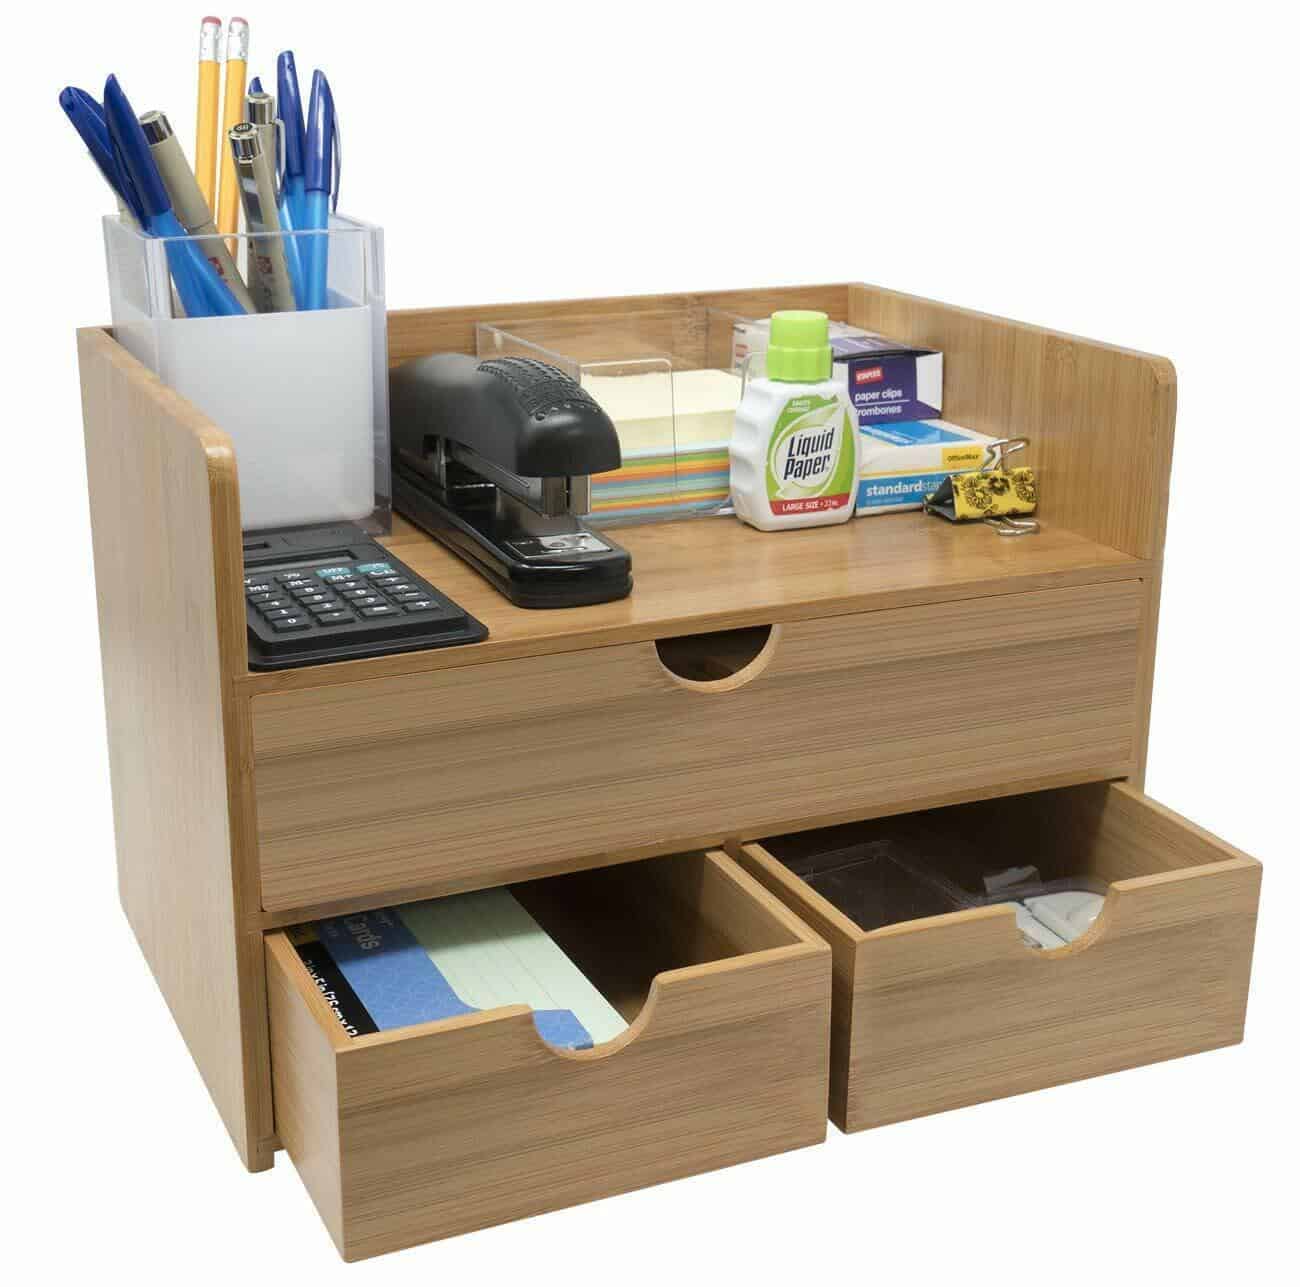 A wooden desk with pens, pencils and a calculator.